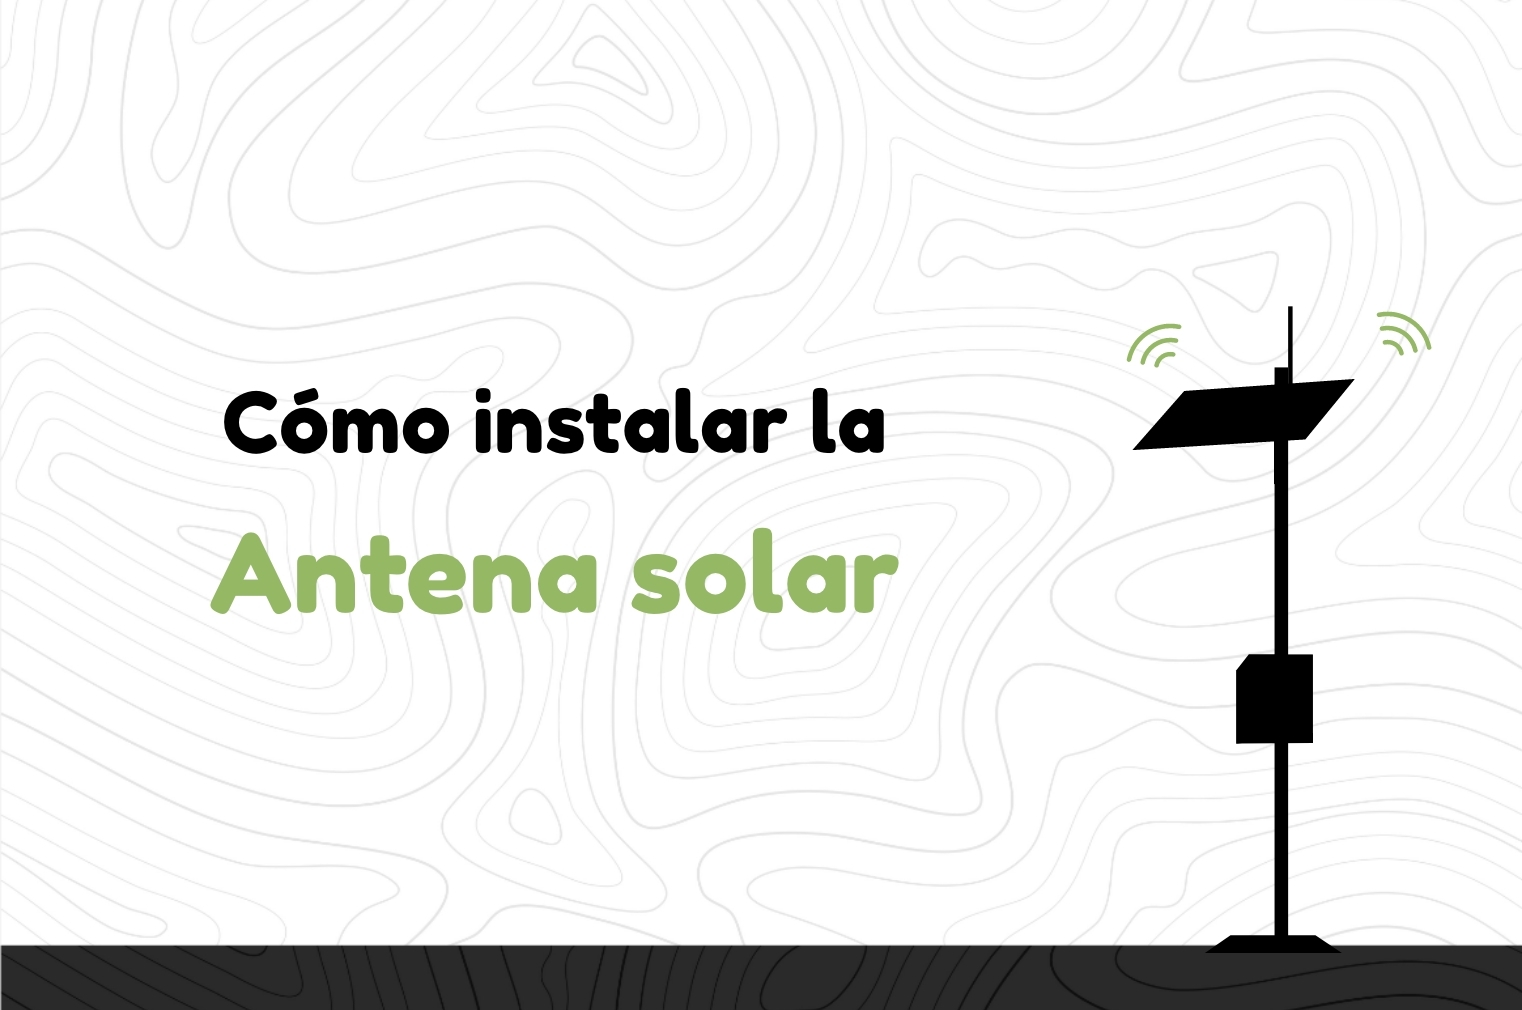 How to install the solar antenna